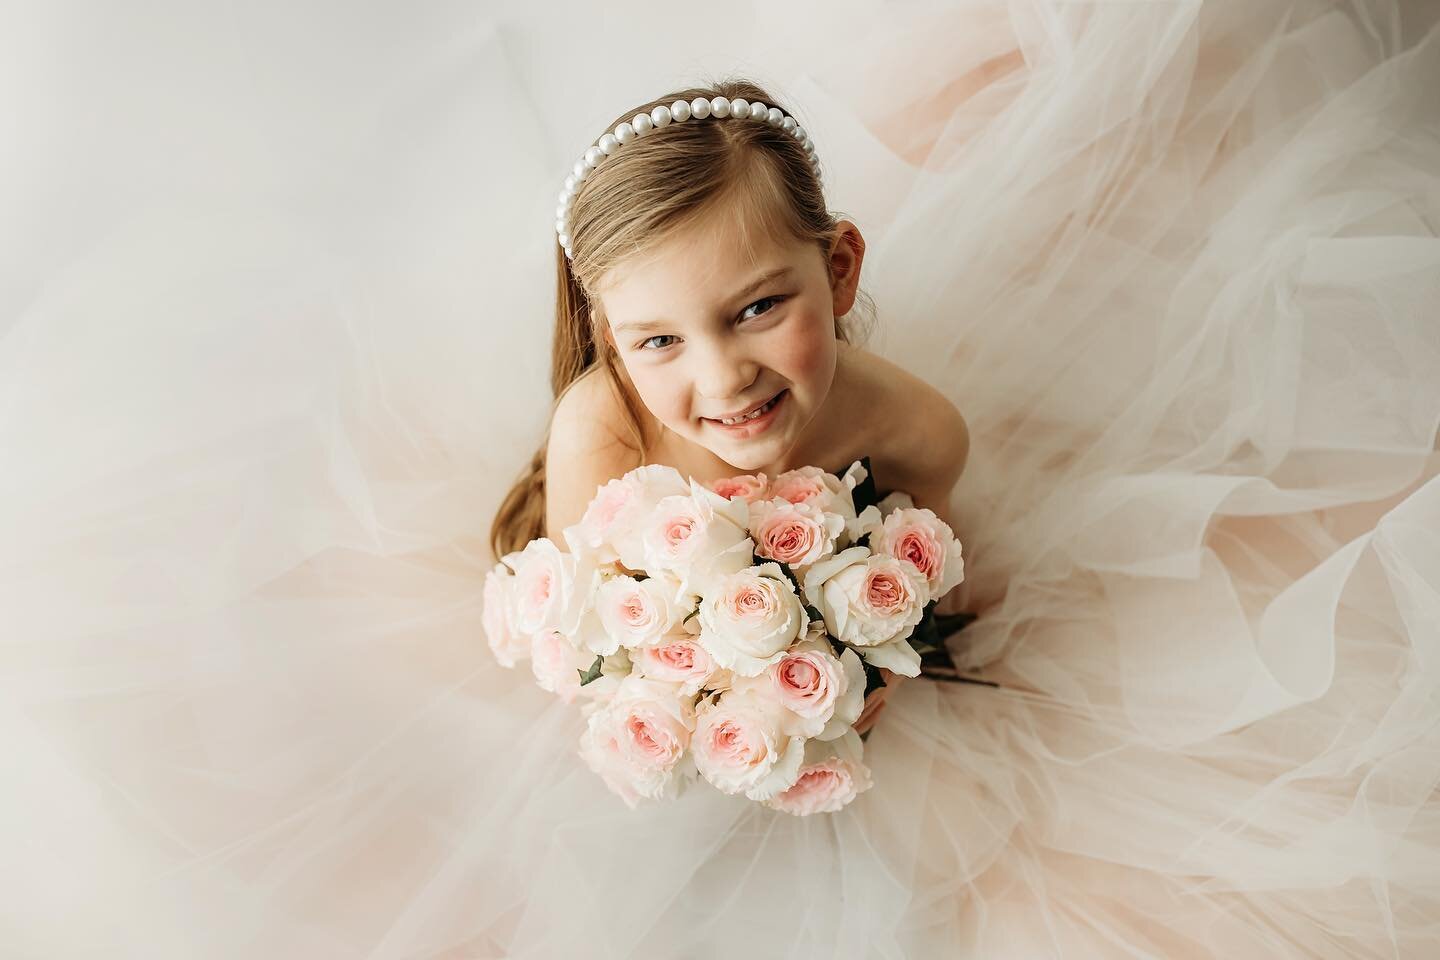 To my daughter, 

Today I took your photos in my wedding dress. You looked so beautiful and sweet&hellip; 

Now Booking Wedding dress minis. Email Picsbynic.smile@gmail.com for more information.